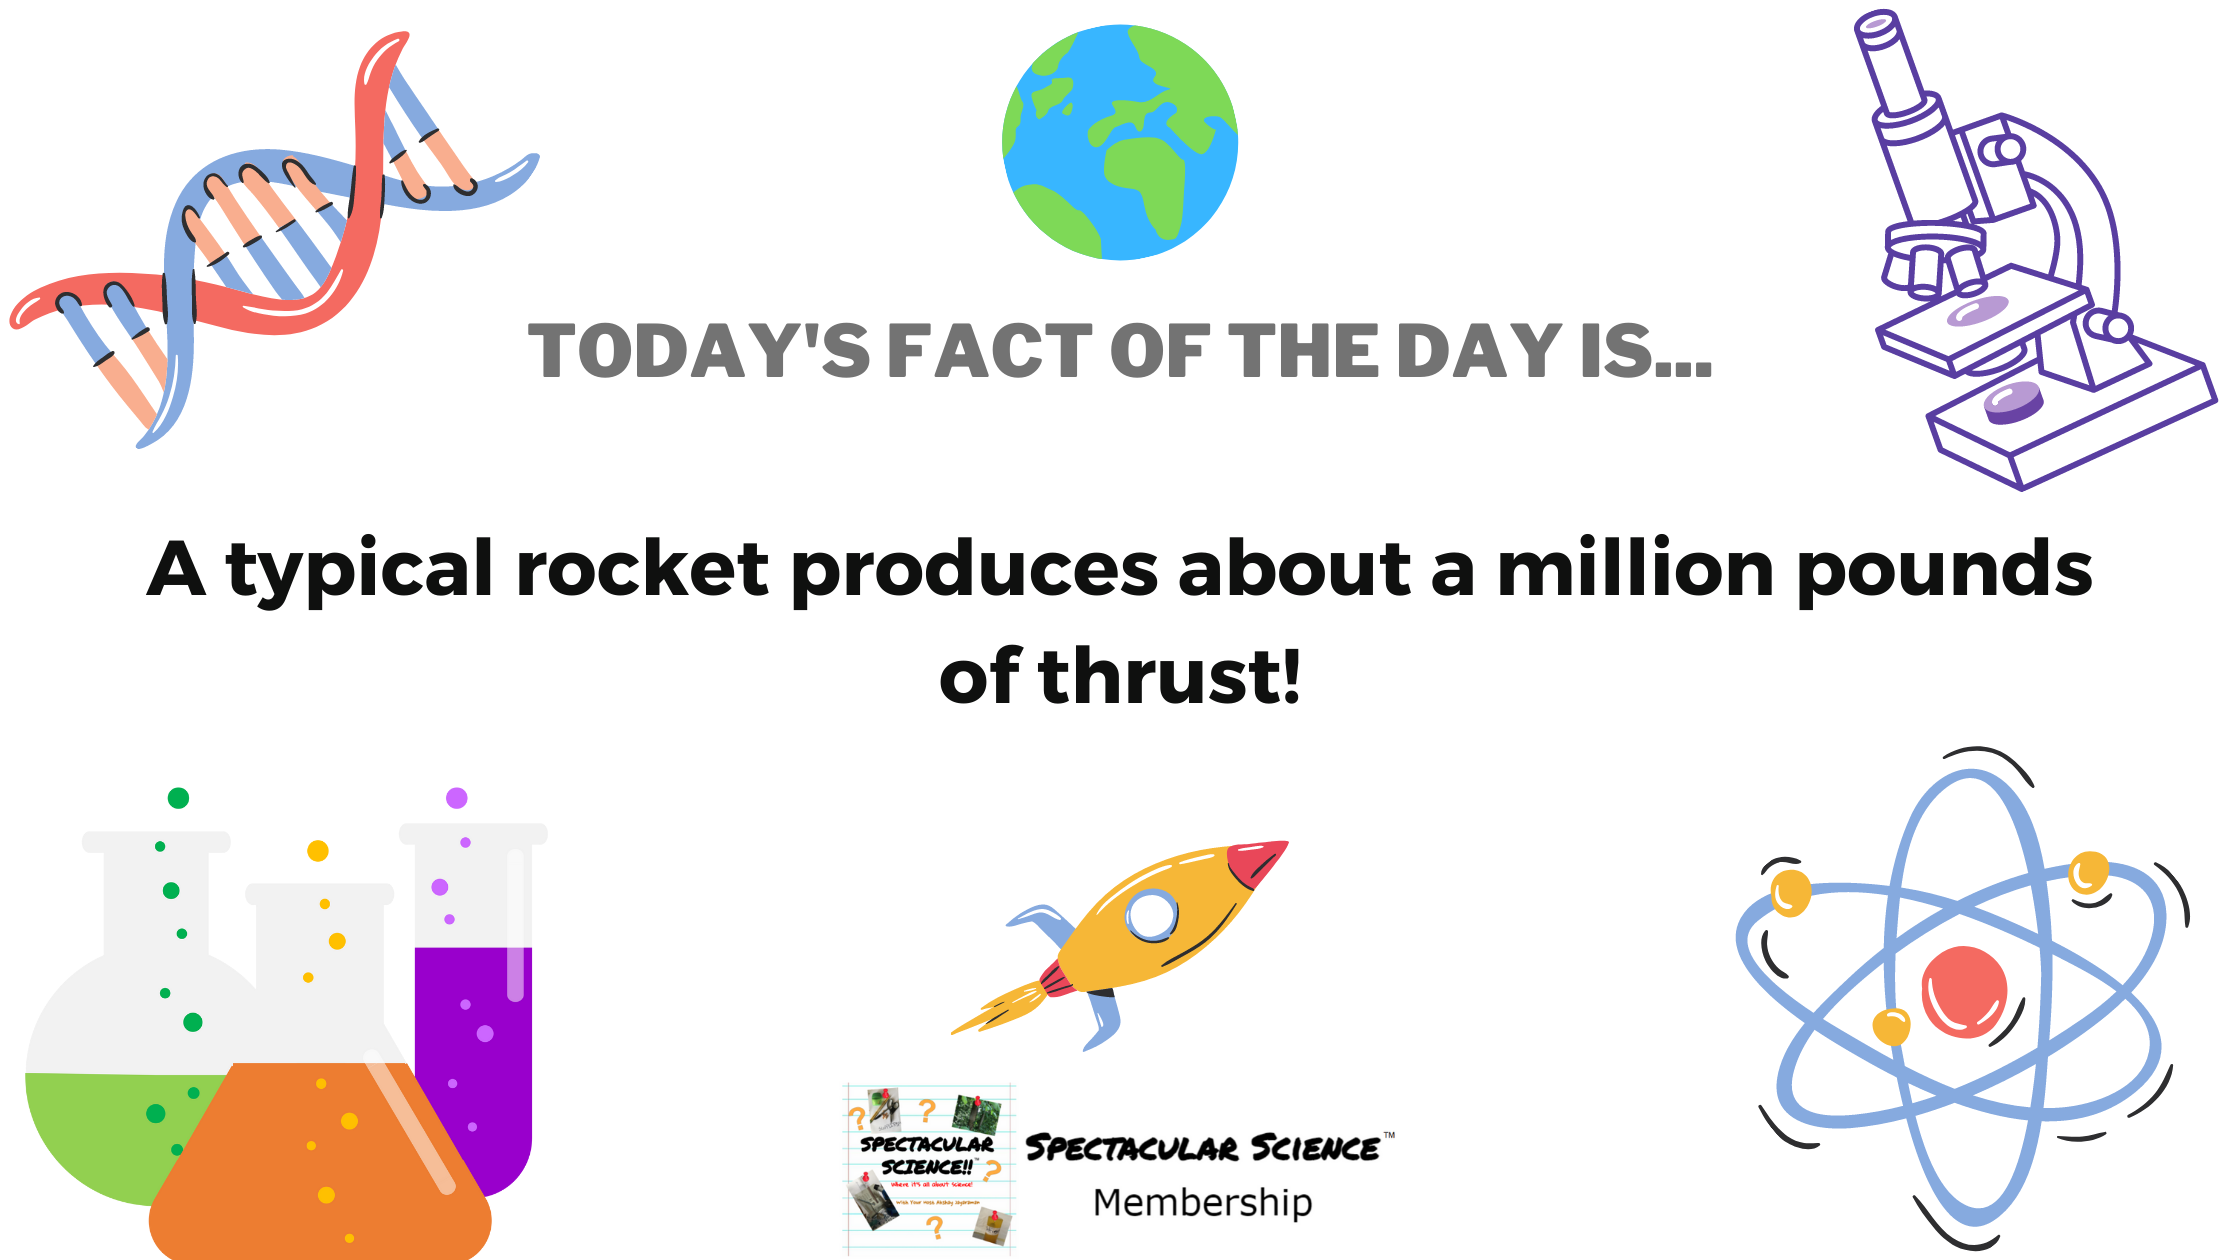 Fact of the Day Image June 21st